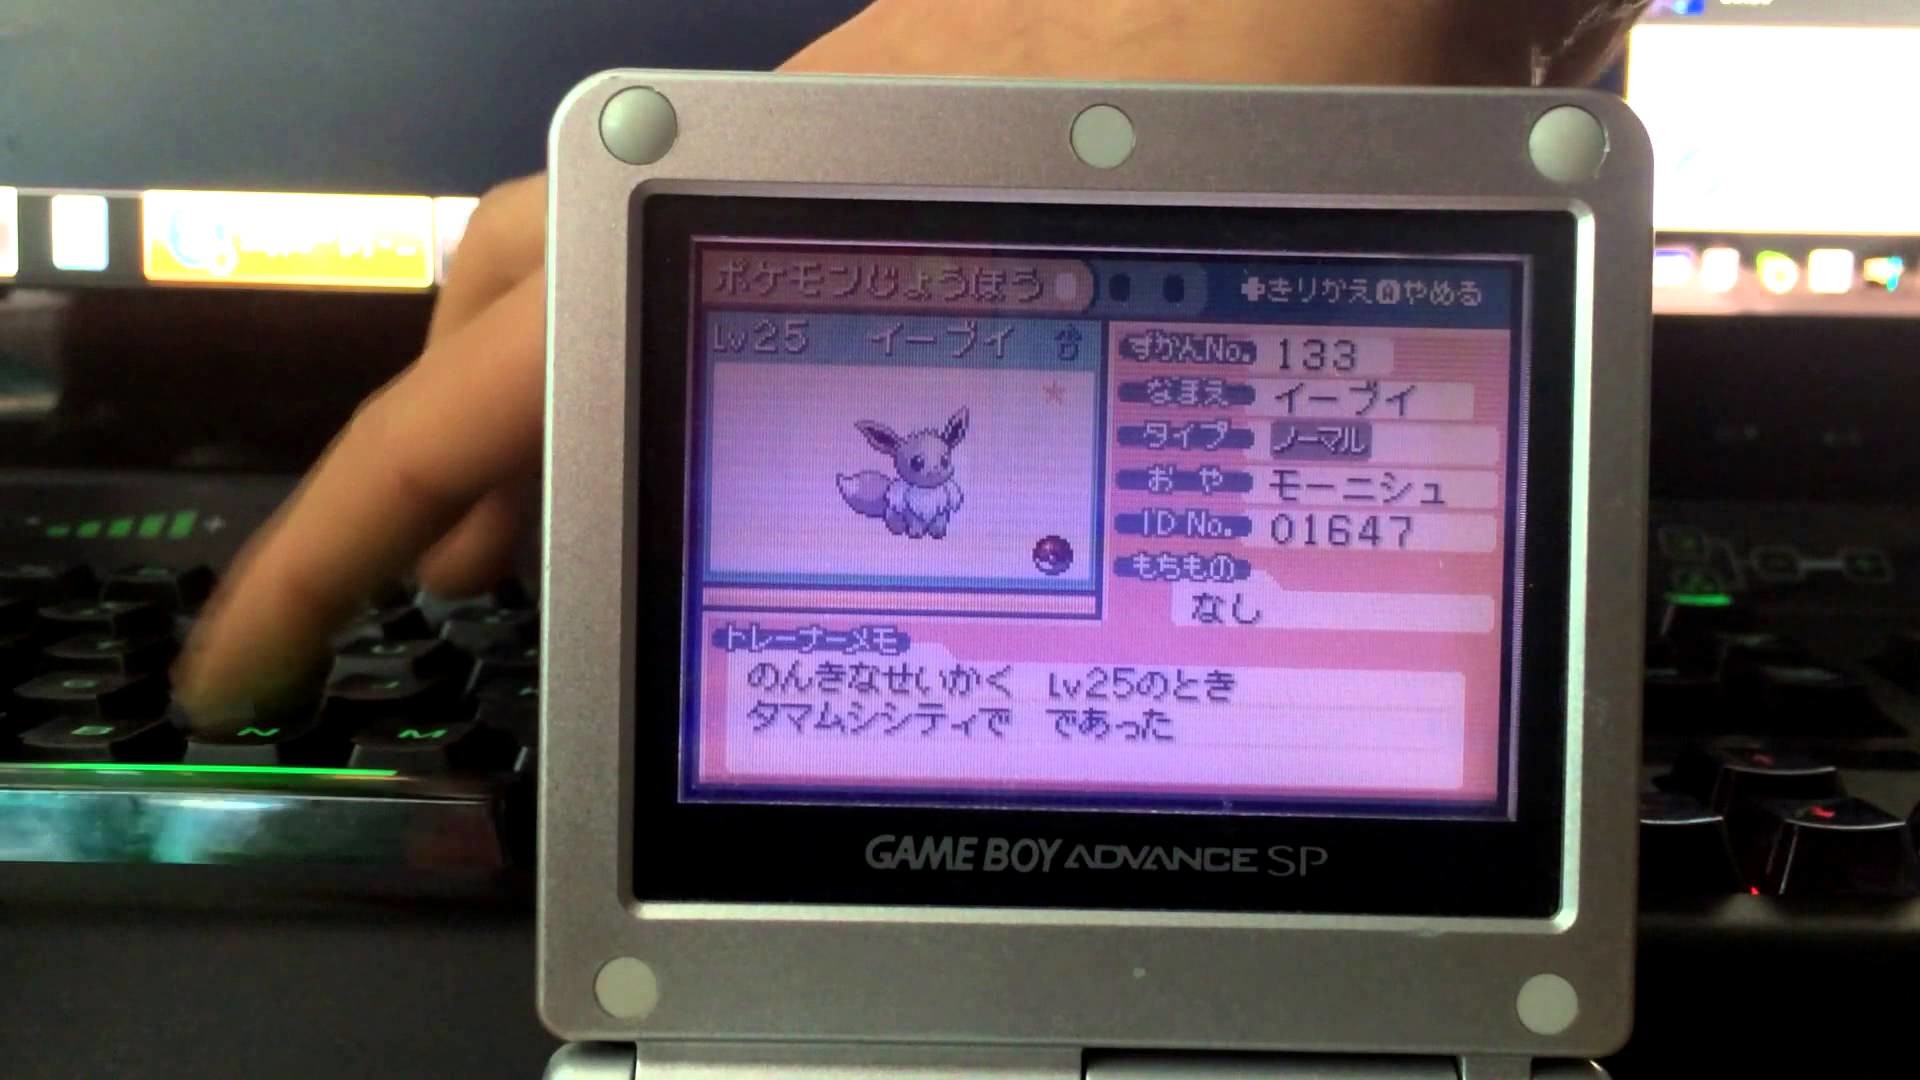 Pair completeLiveish Shiny Eevee in Japanese Leaf Green after SRs